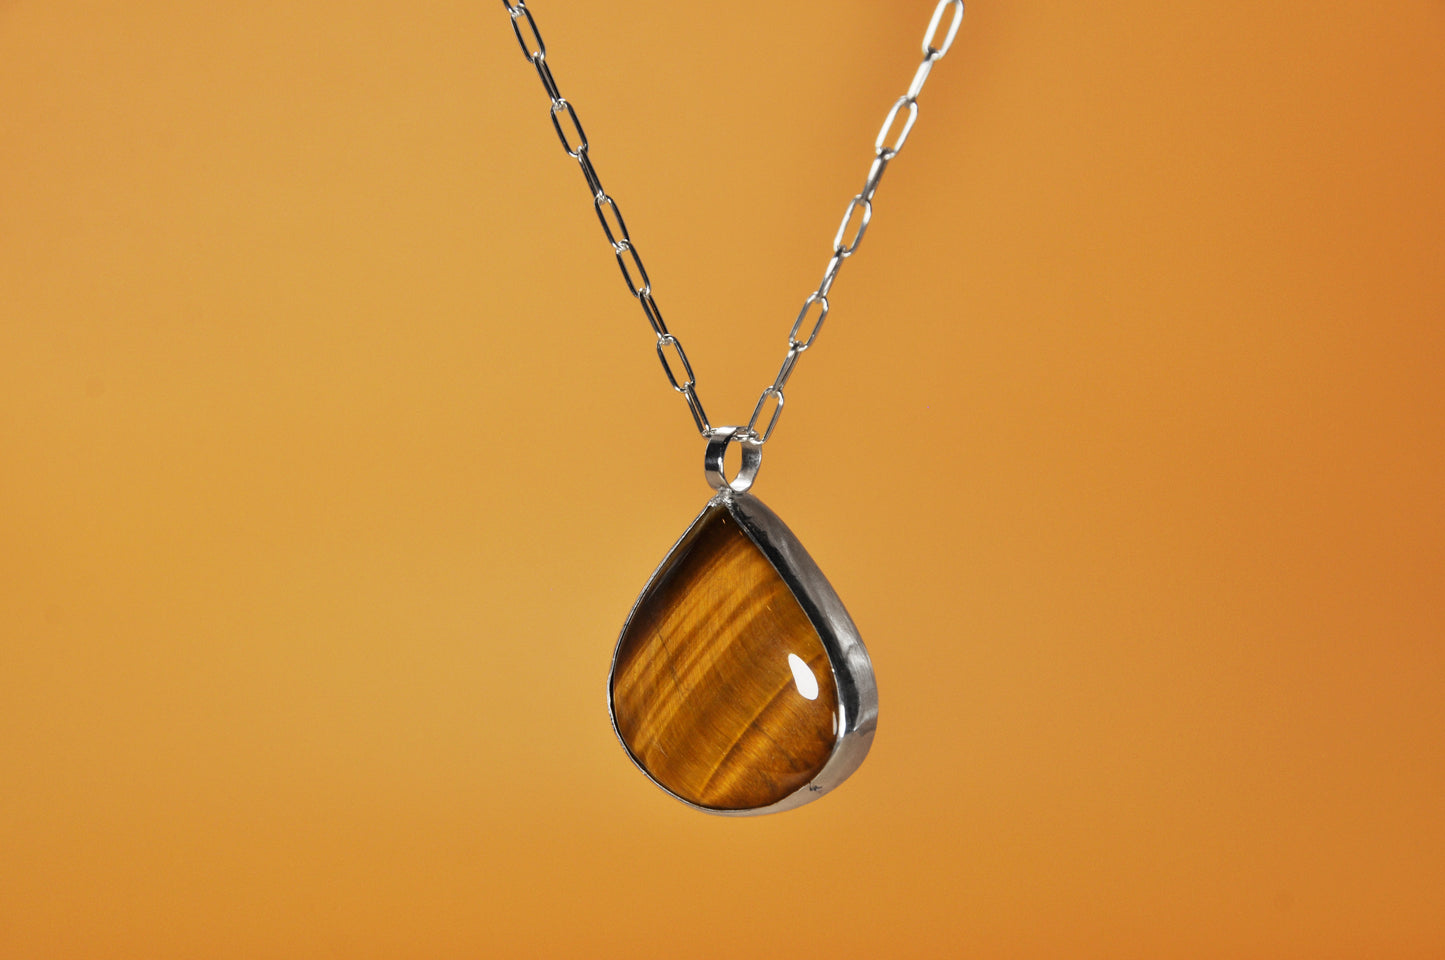 Tiger's Eye Pear Shaped Pendant Necklace